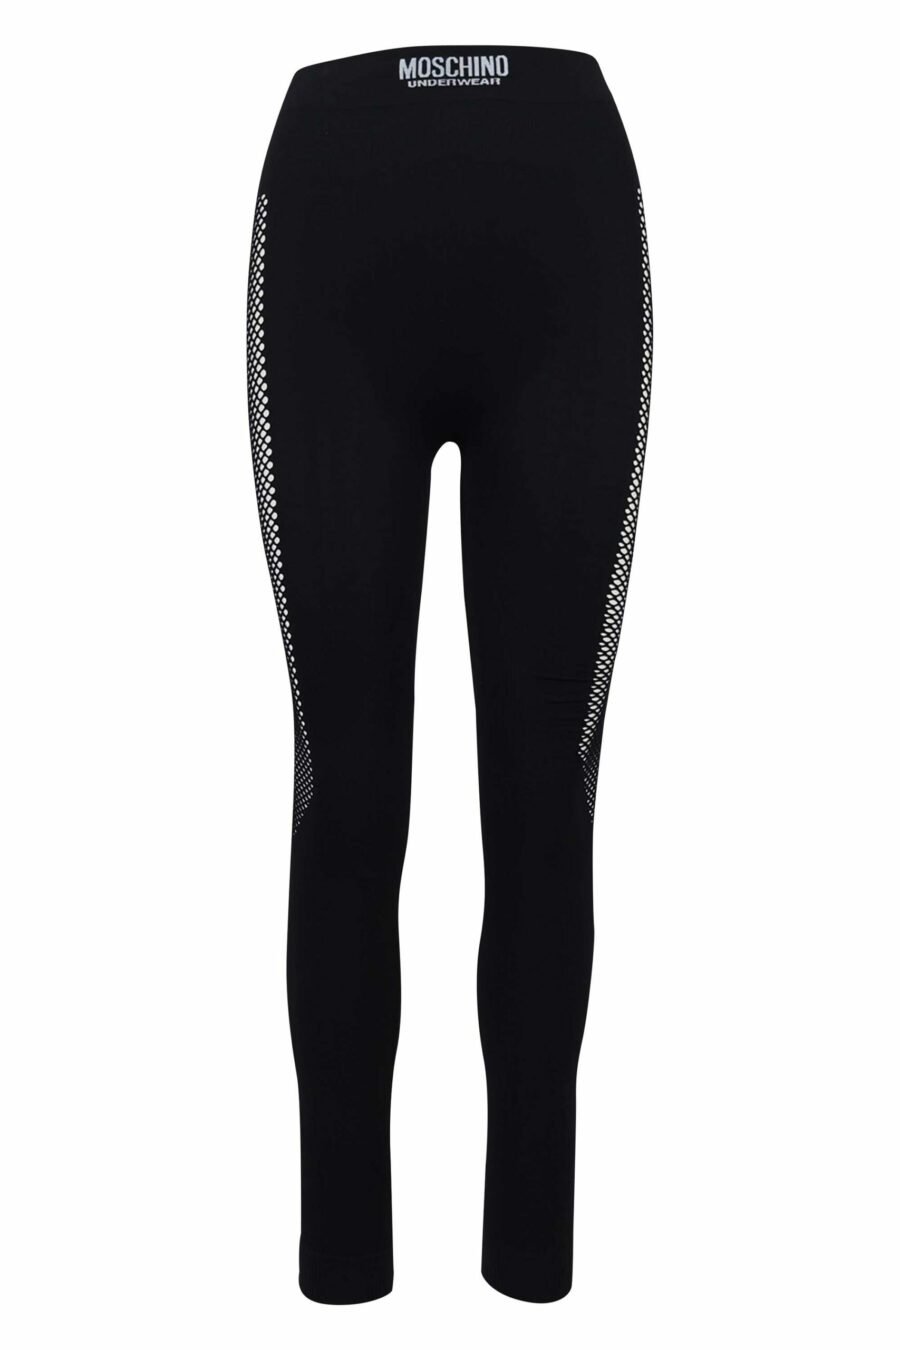 Black leggings with logo and side mesh - 889316611816 scaled